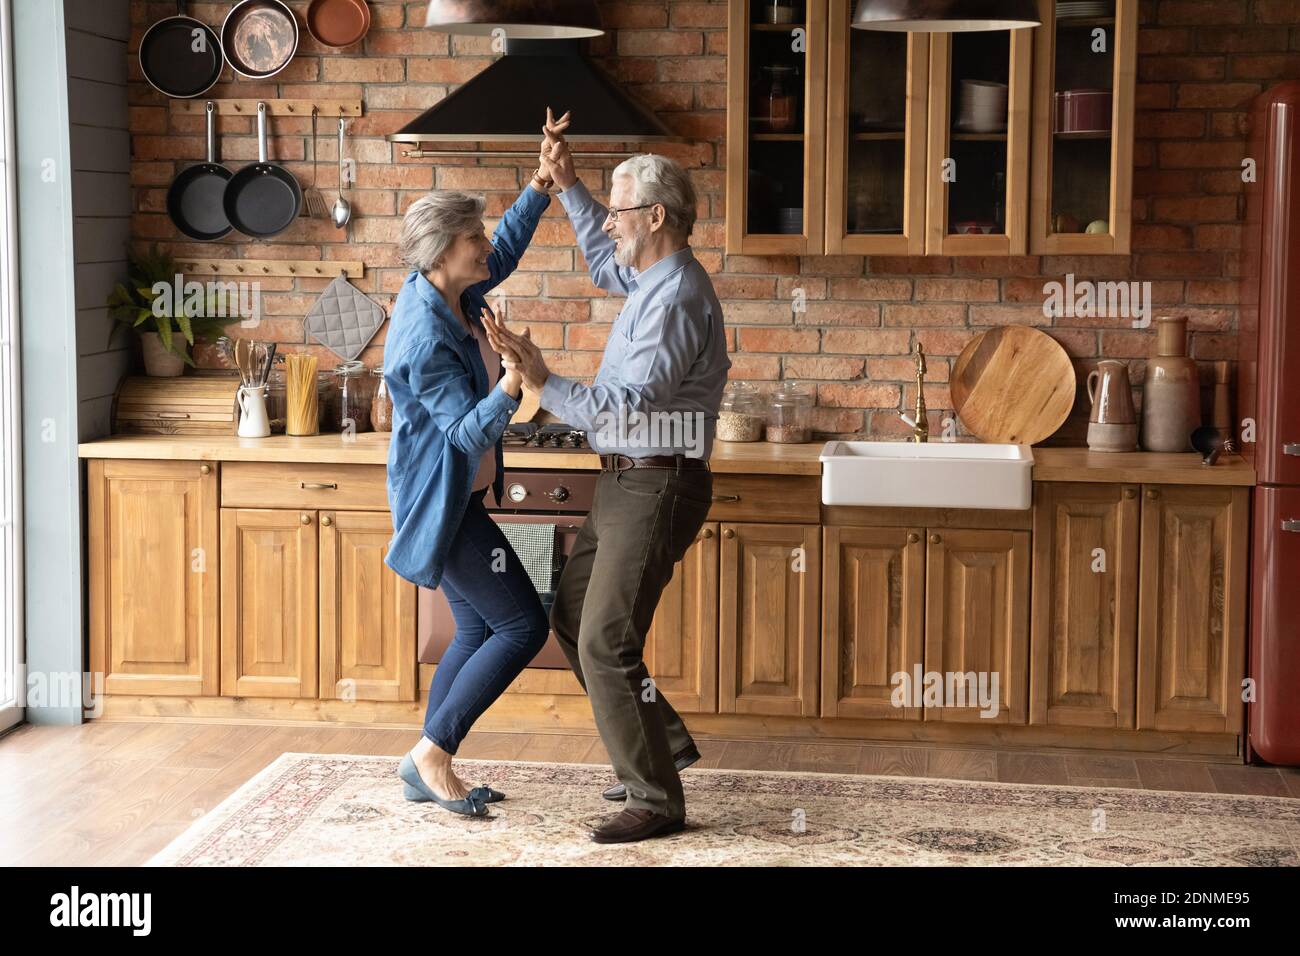 Energetic middle aged family couple dancing in kitchen. Stock Photo